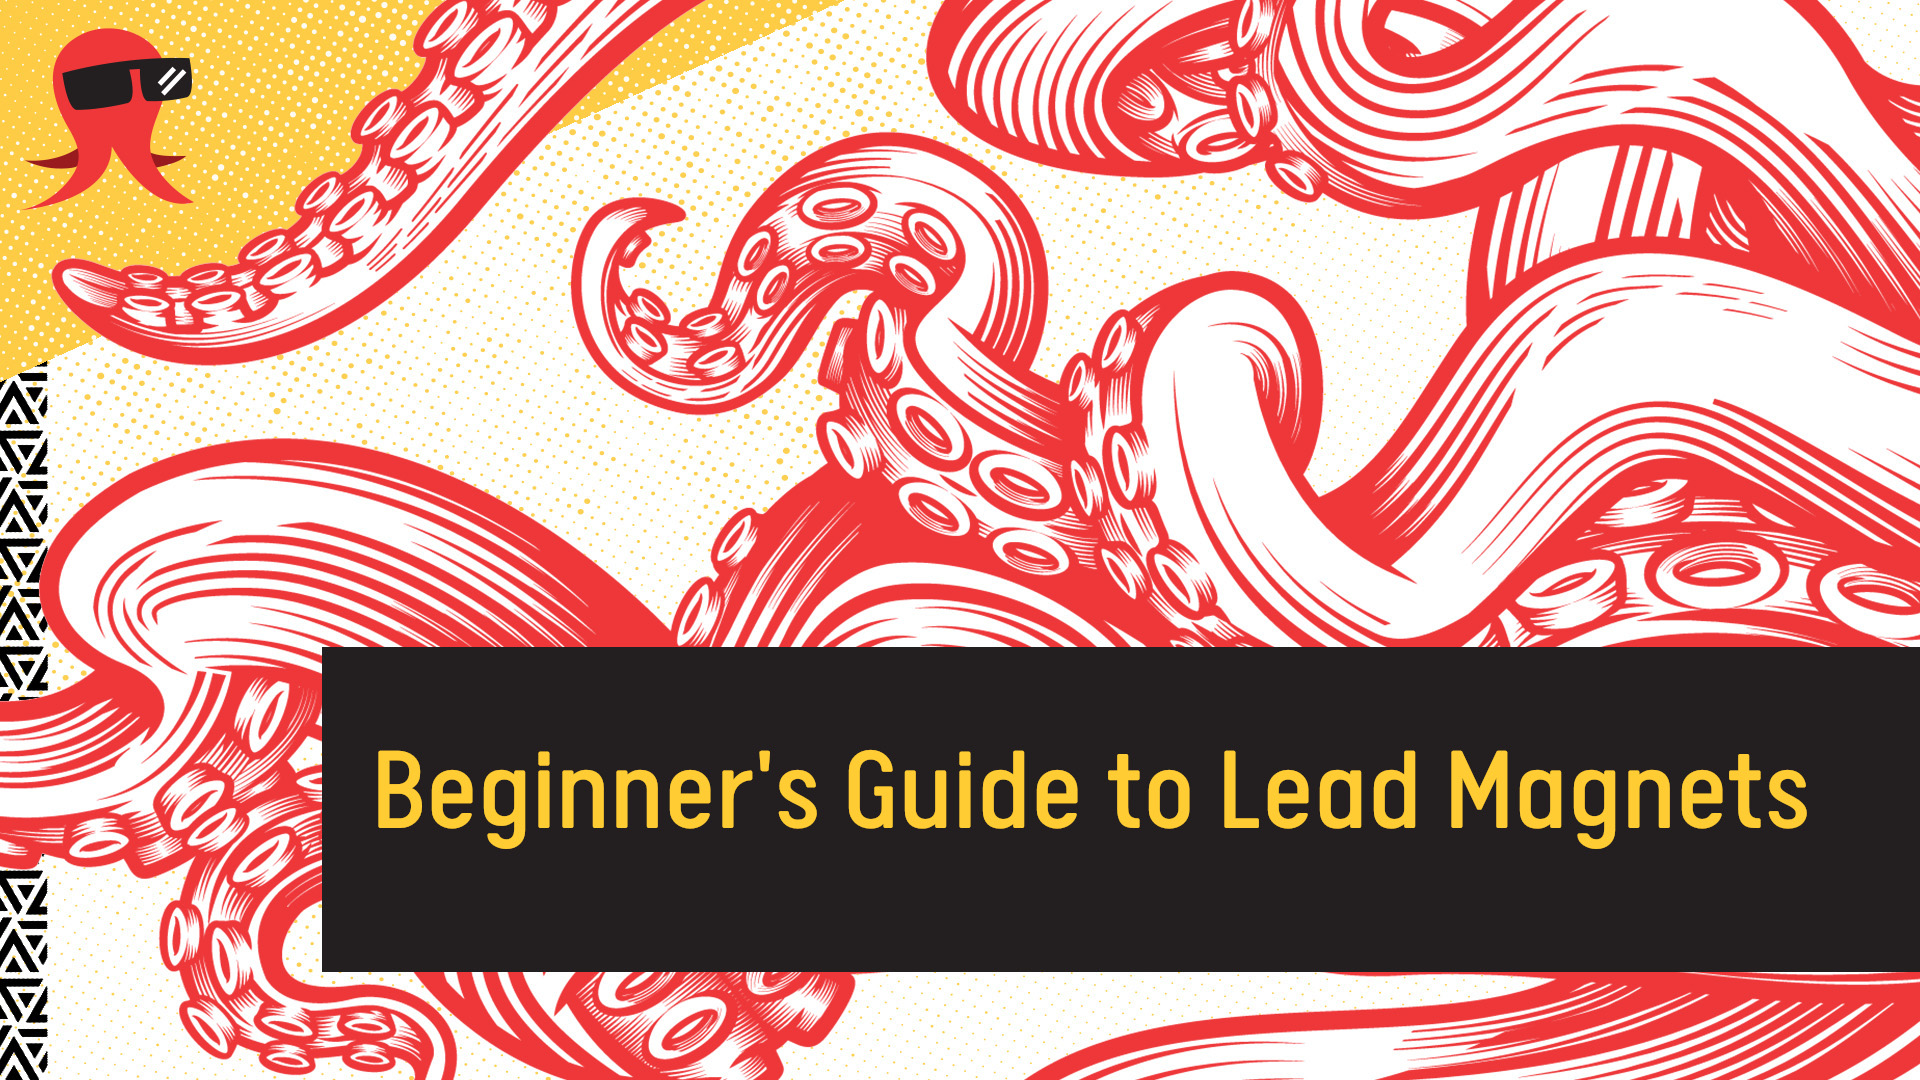 Beginner’s Guide to Lead Magnets